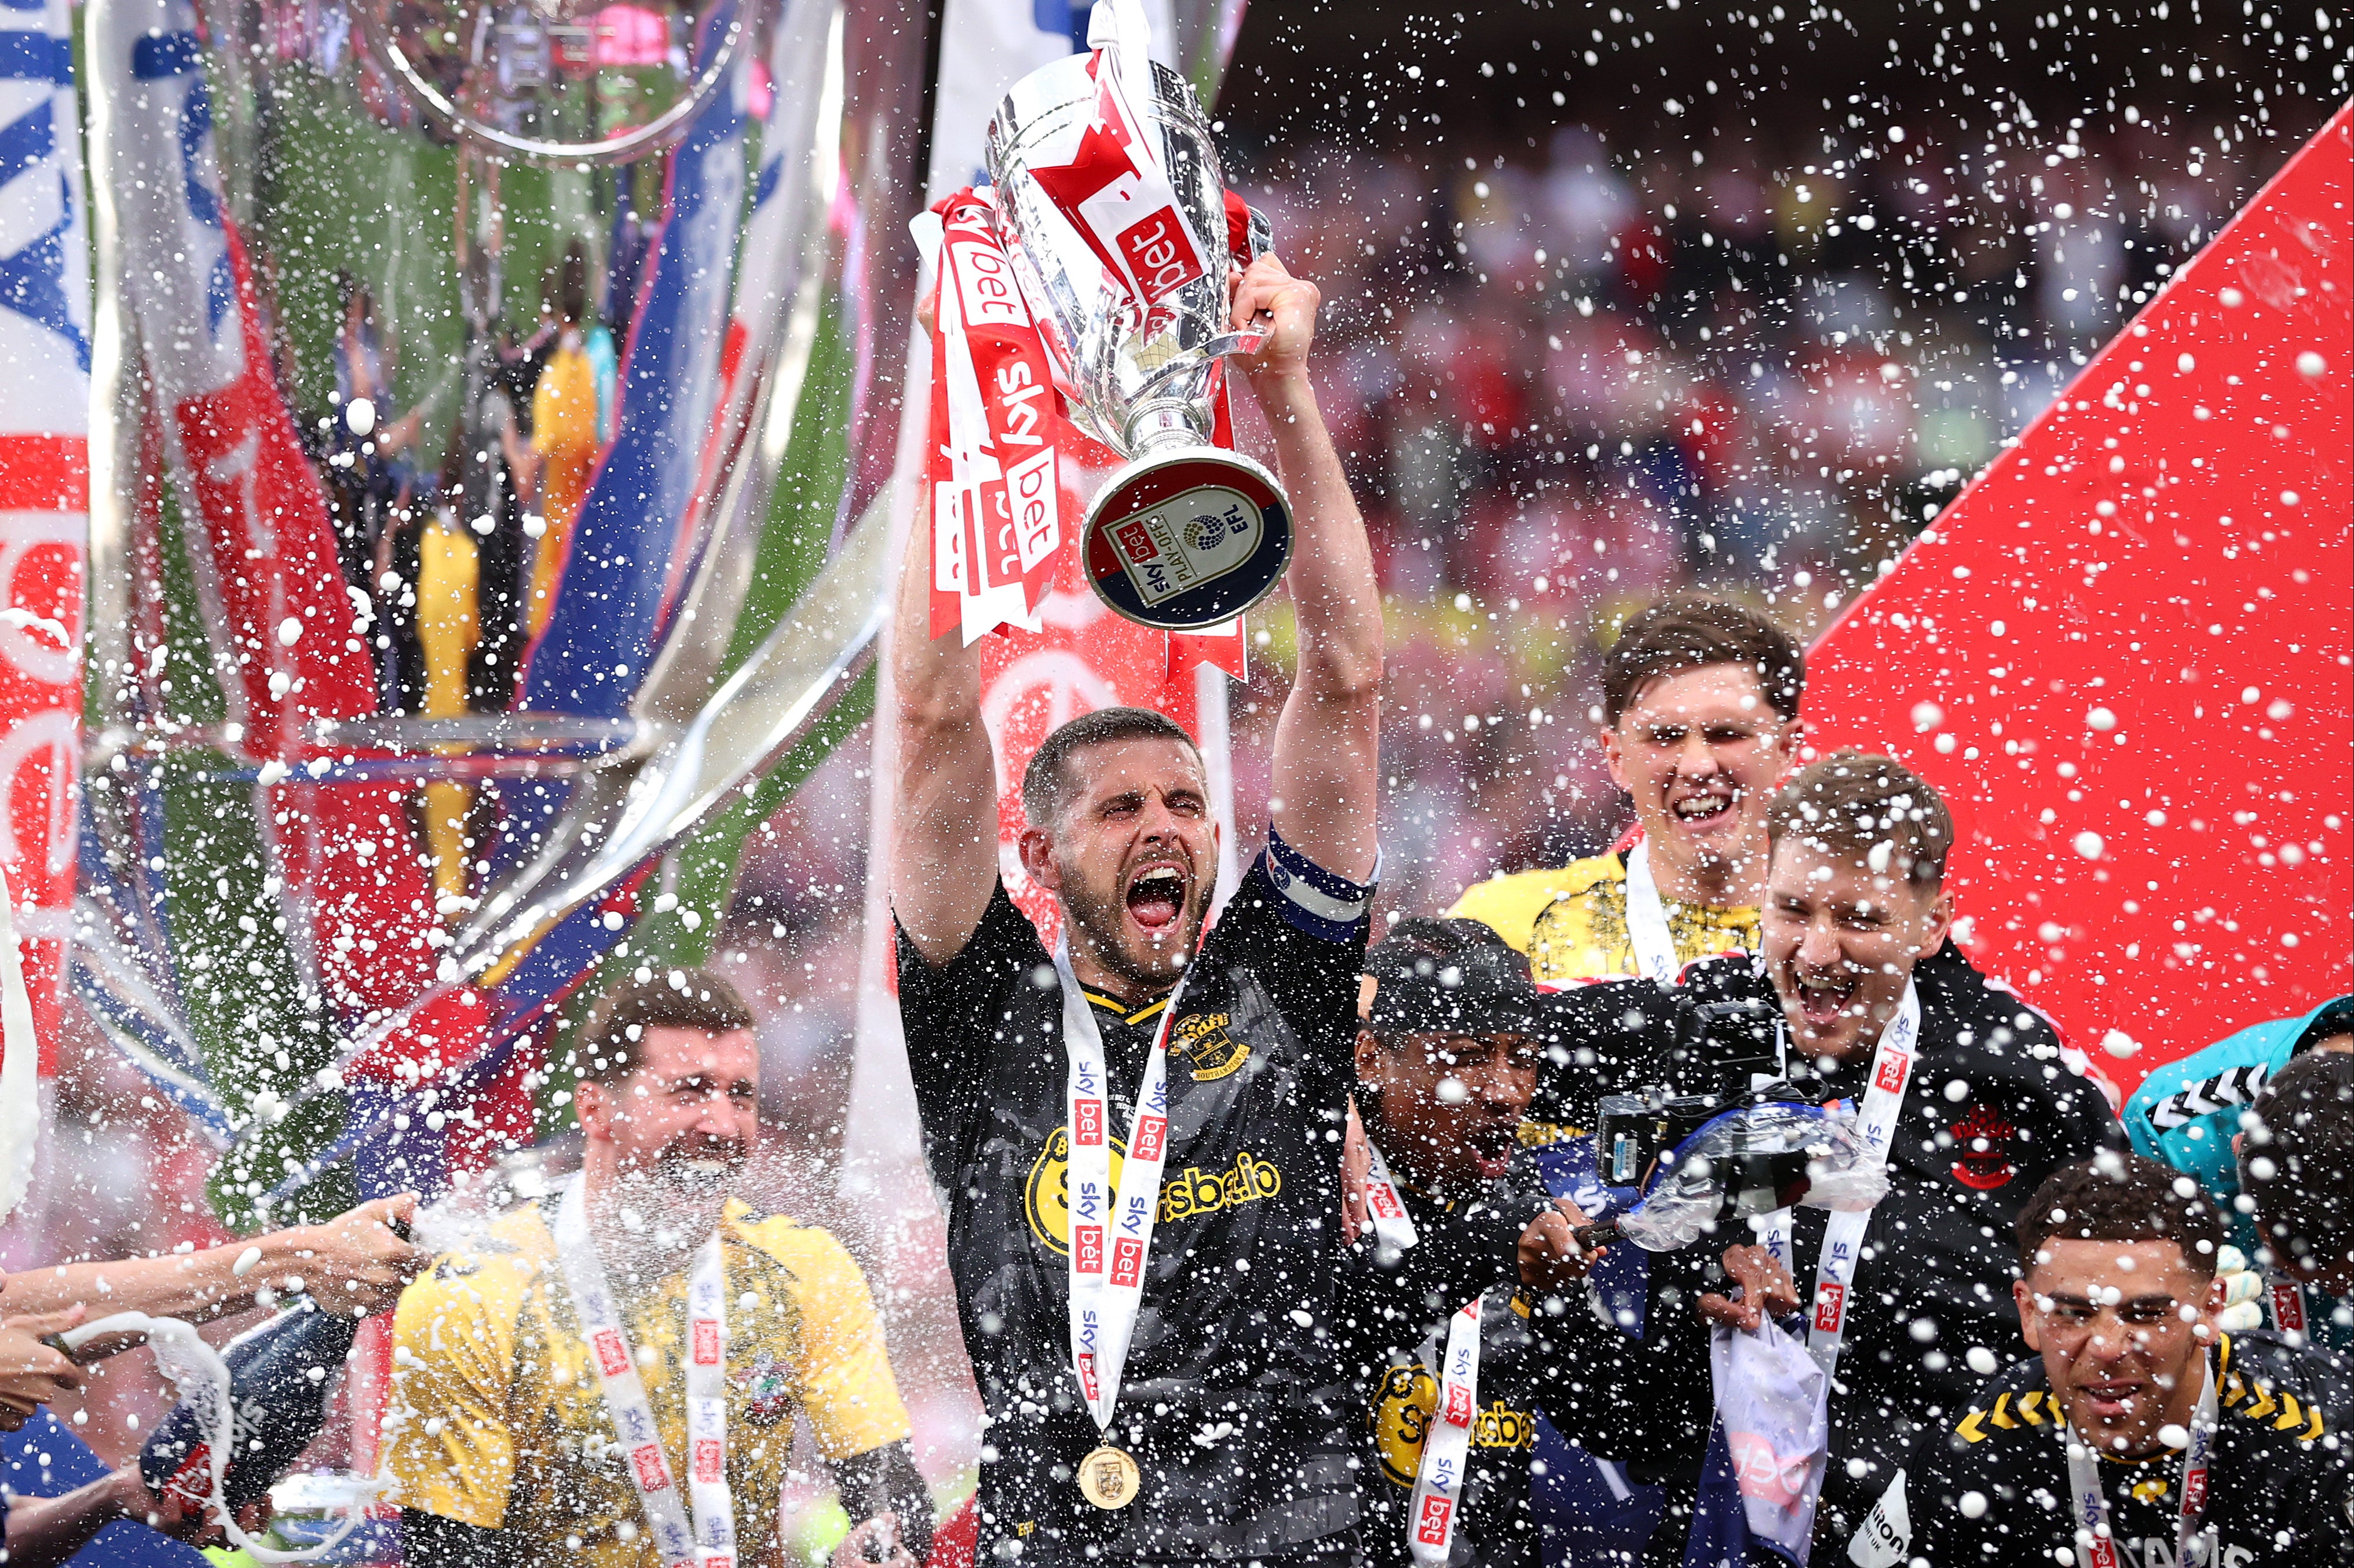 Southampton’s Championship play-off final victory will earn the club upwards of £140m